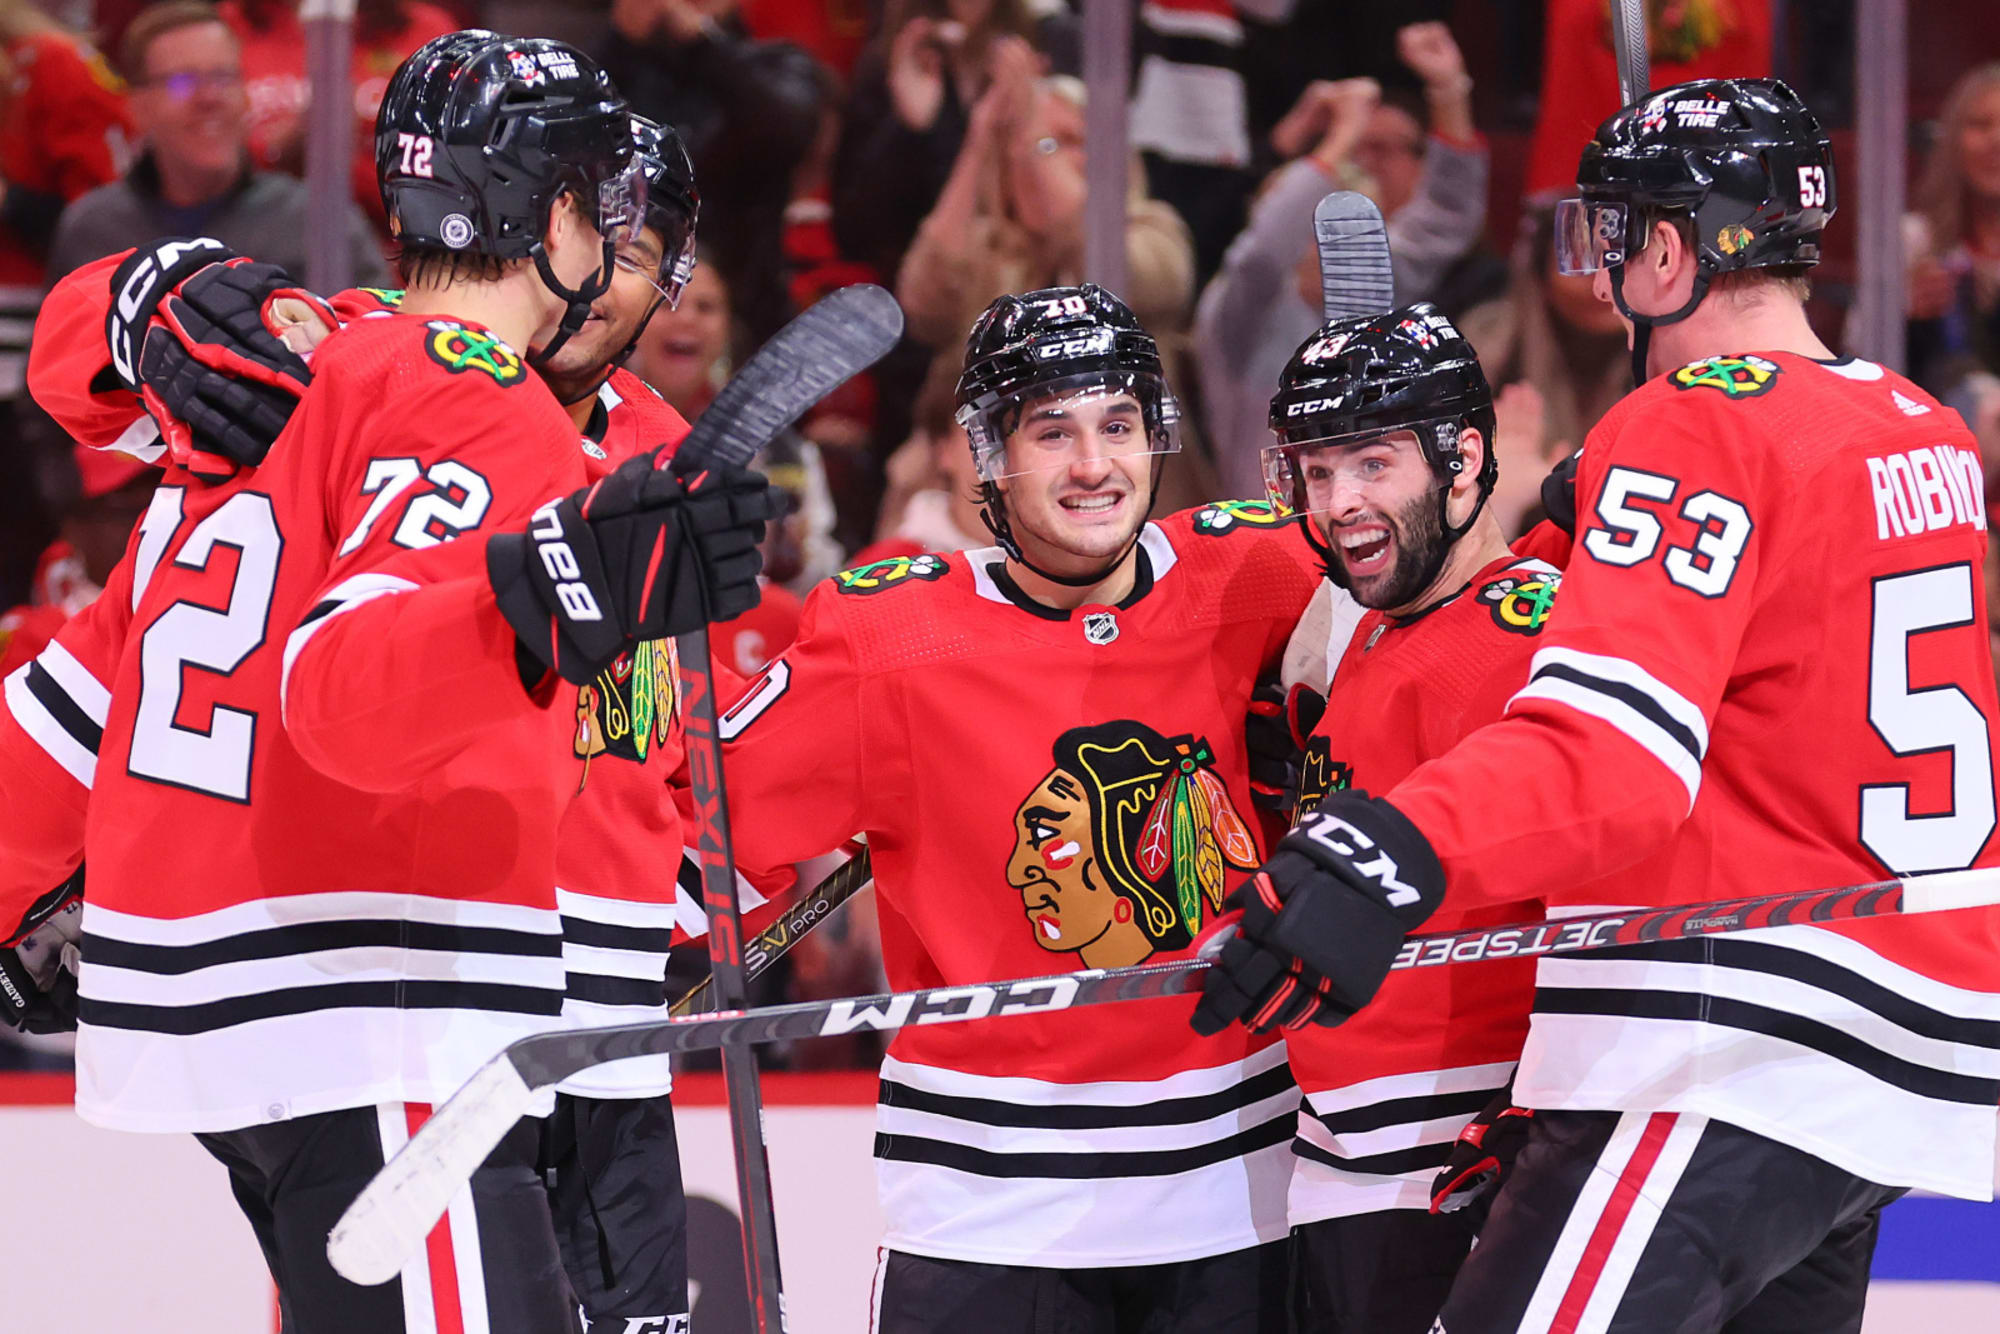 Chicago Blackhawks preseason game is a sign of things to come